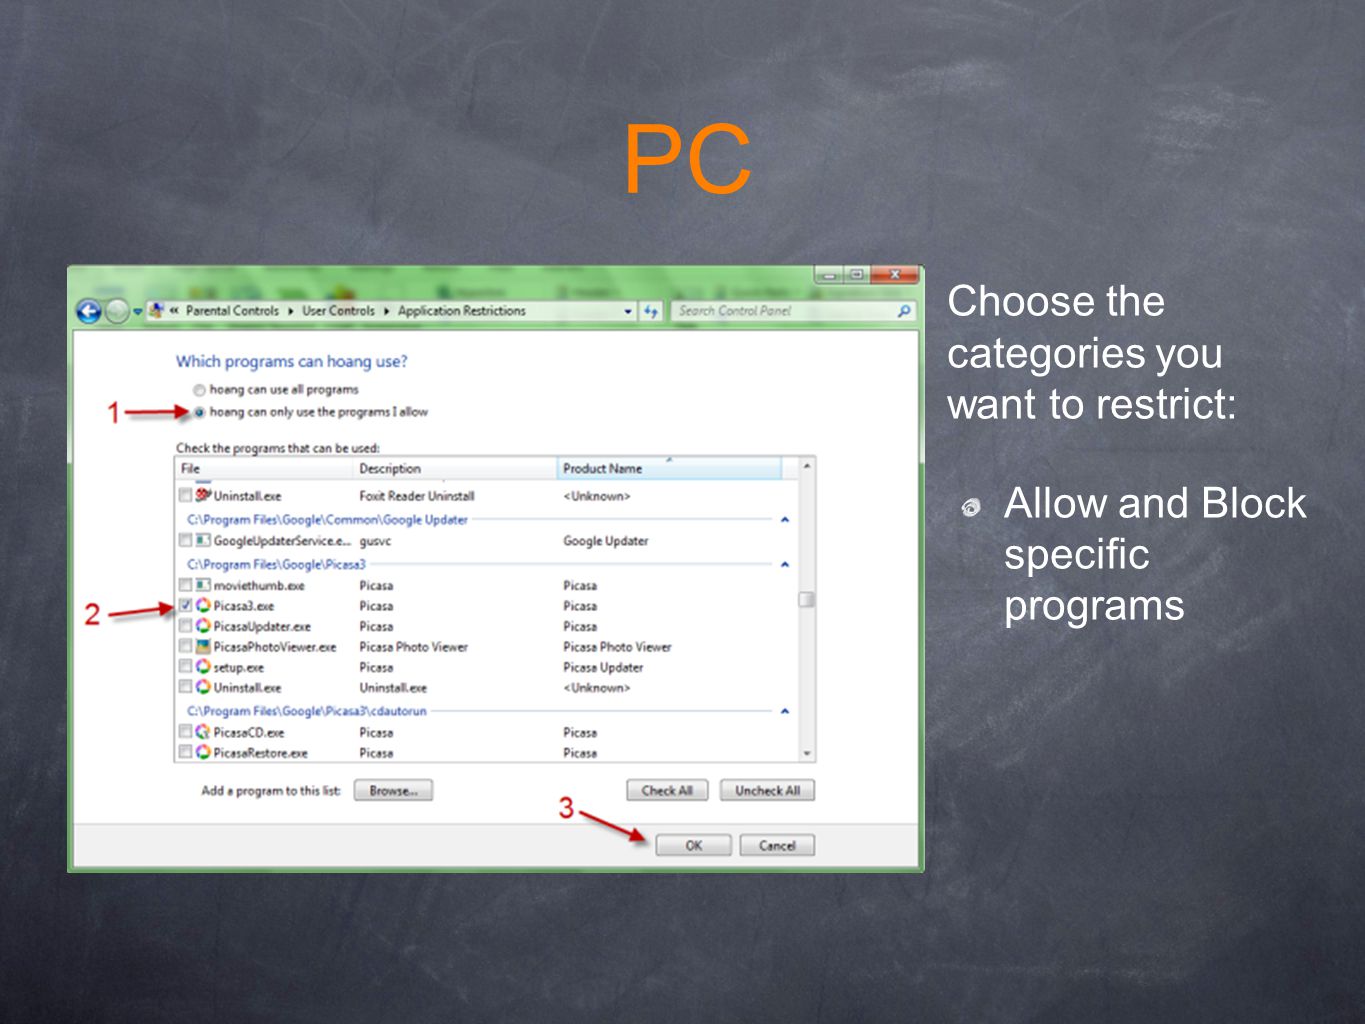 PC Choose the categories you want to restrict: Allow and Block specific programs